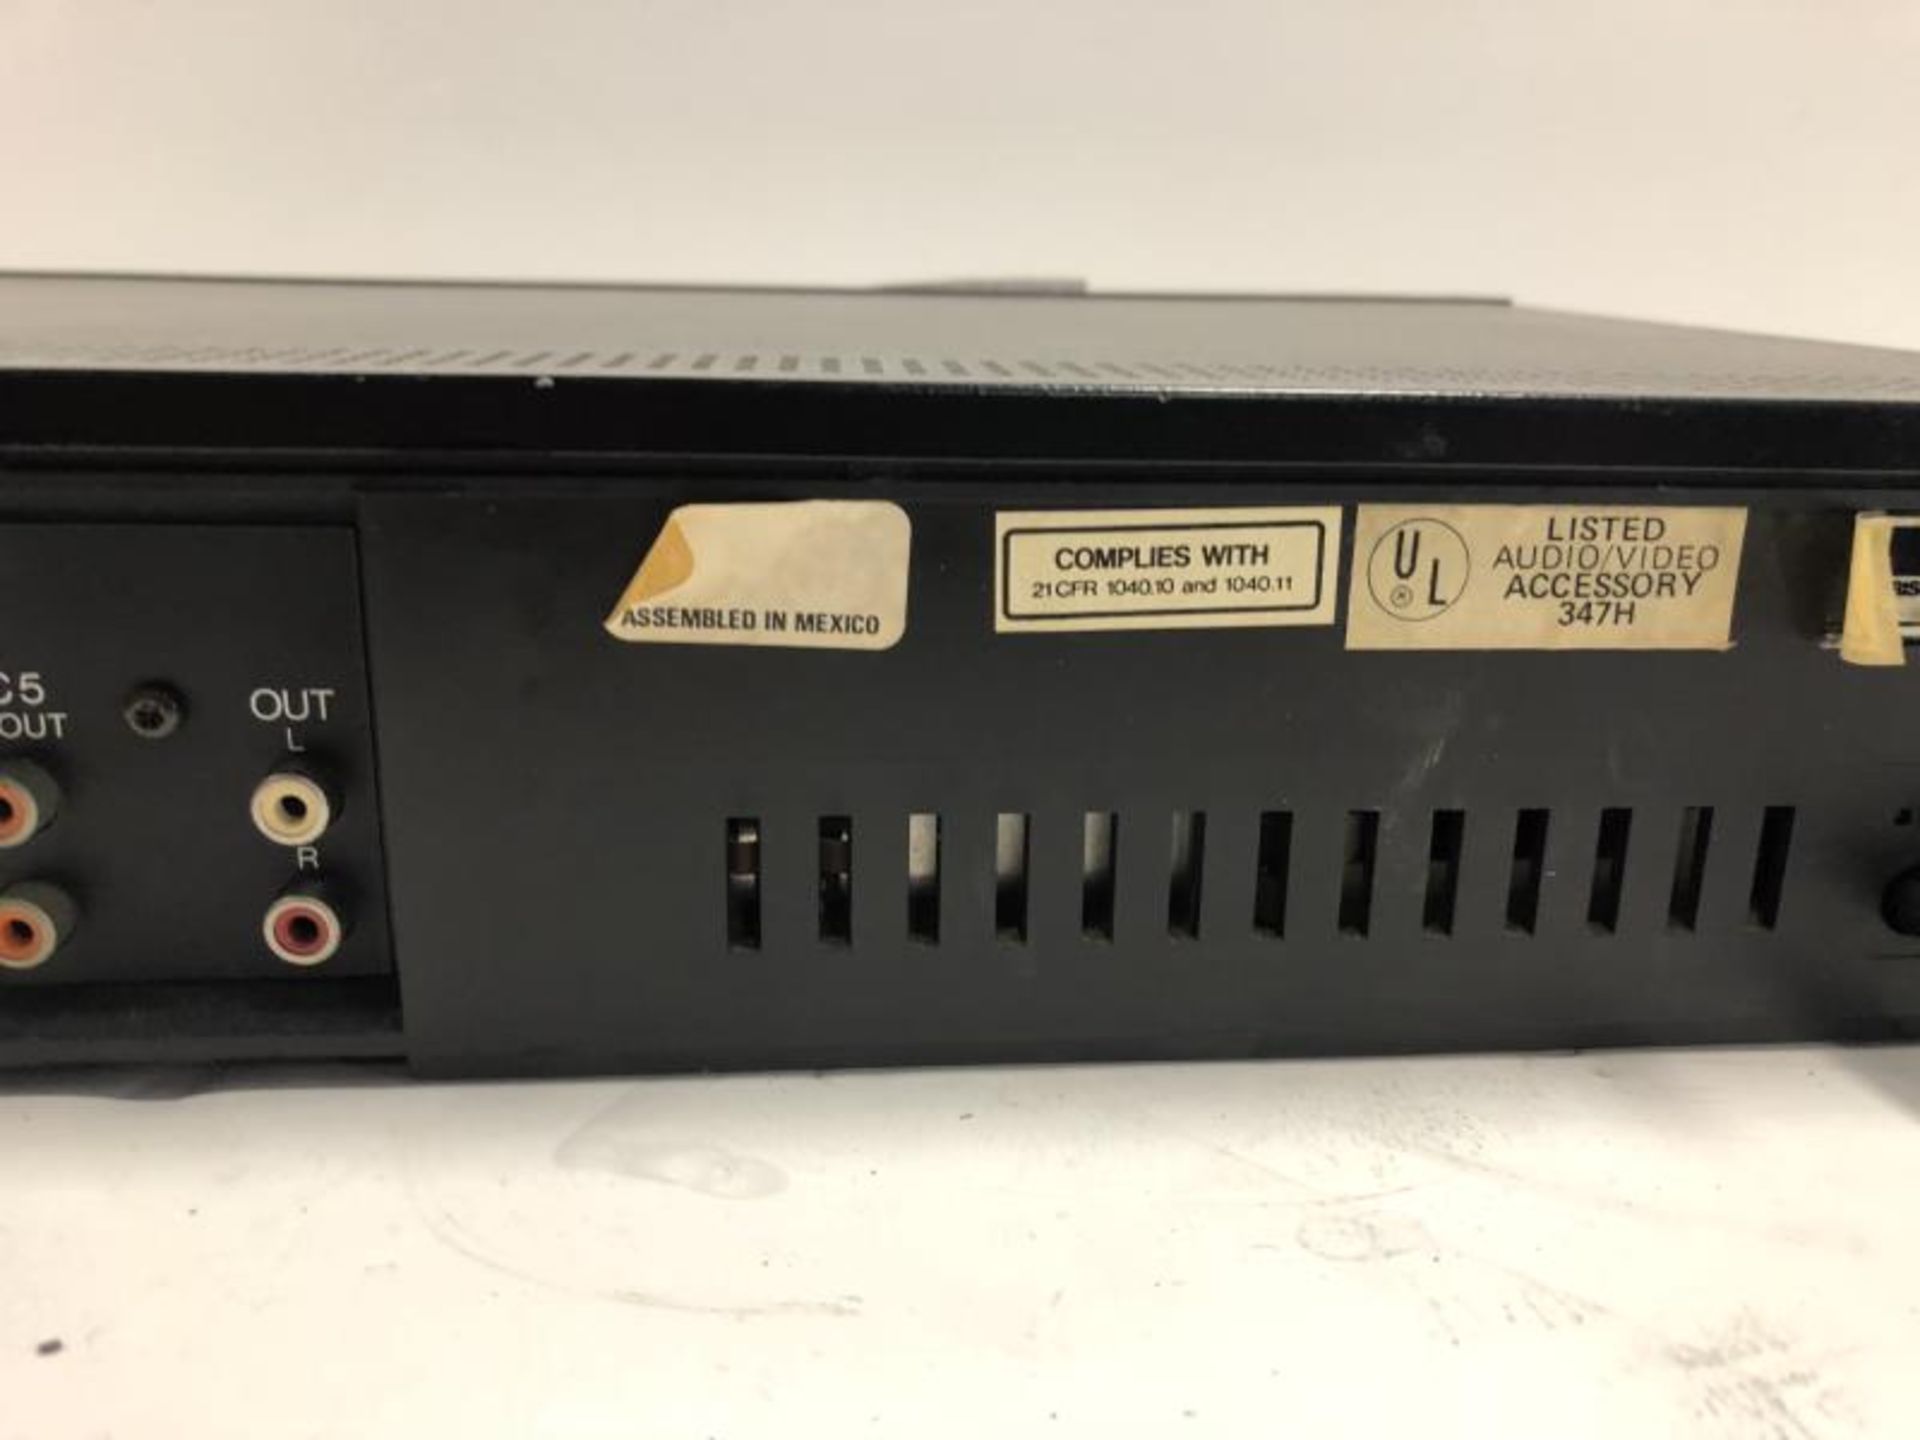 Magnavox Compact Disc Player, CDB492, tested - powers up - Image 4 of 5